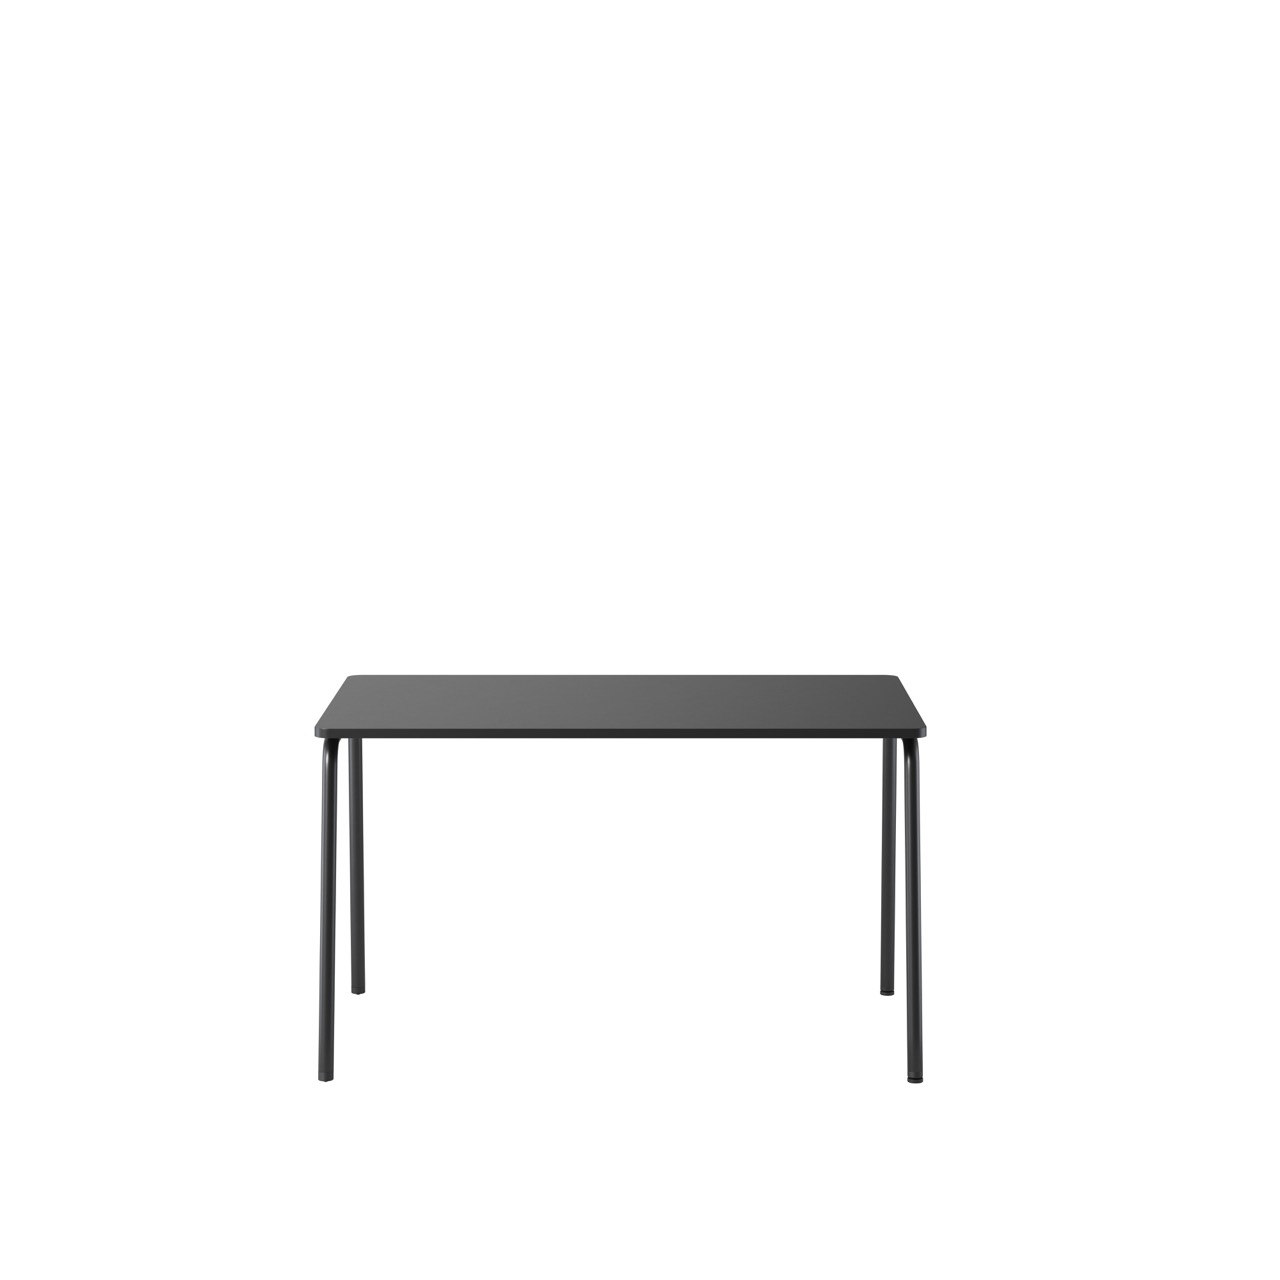 OCEE&FOUR - Tables - FourReal 74 - 120 x 80 - Angled - Packshot Image 1 Large